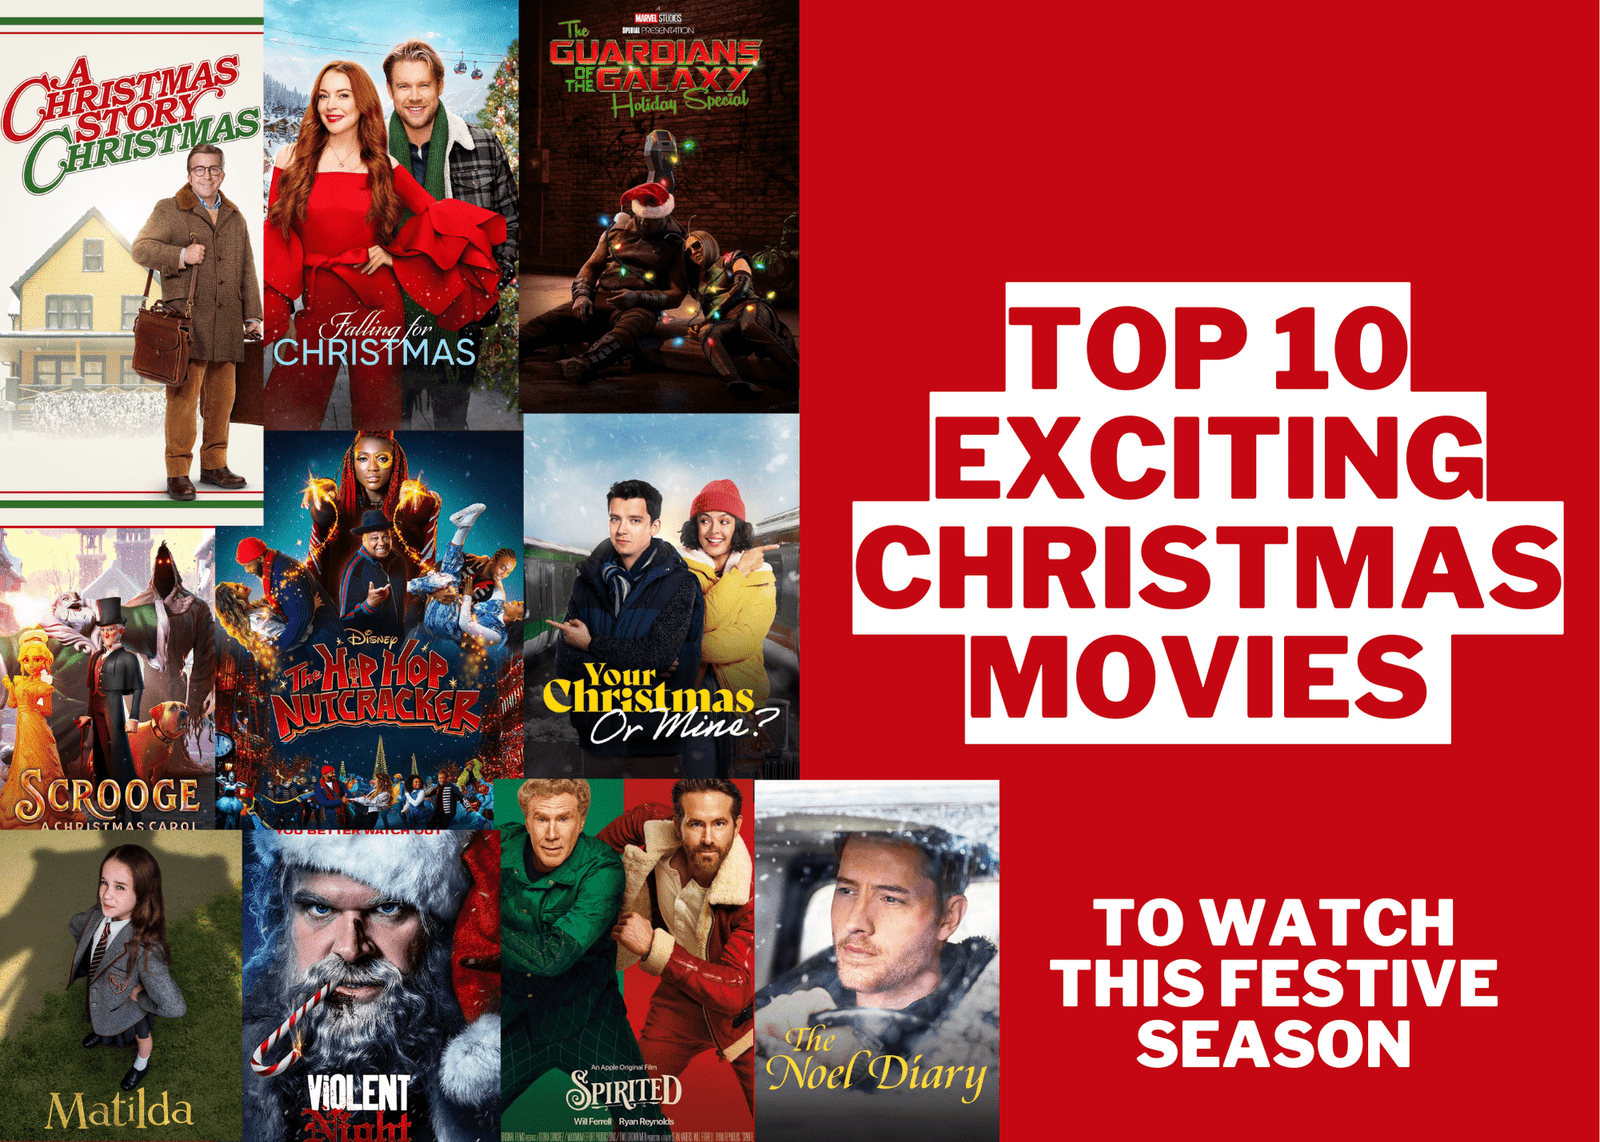 Top 10 Exciting Christmas Movies